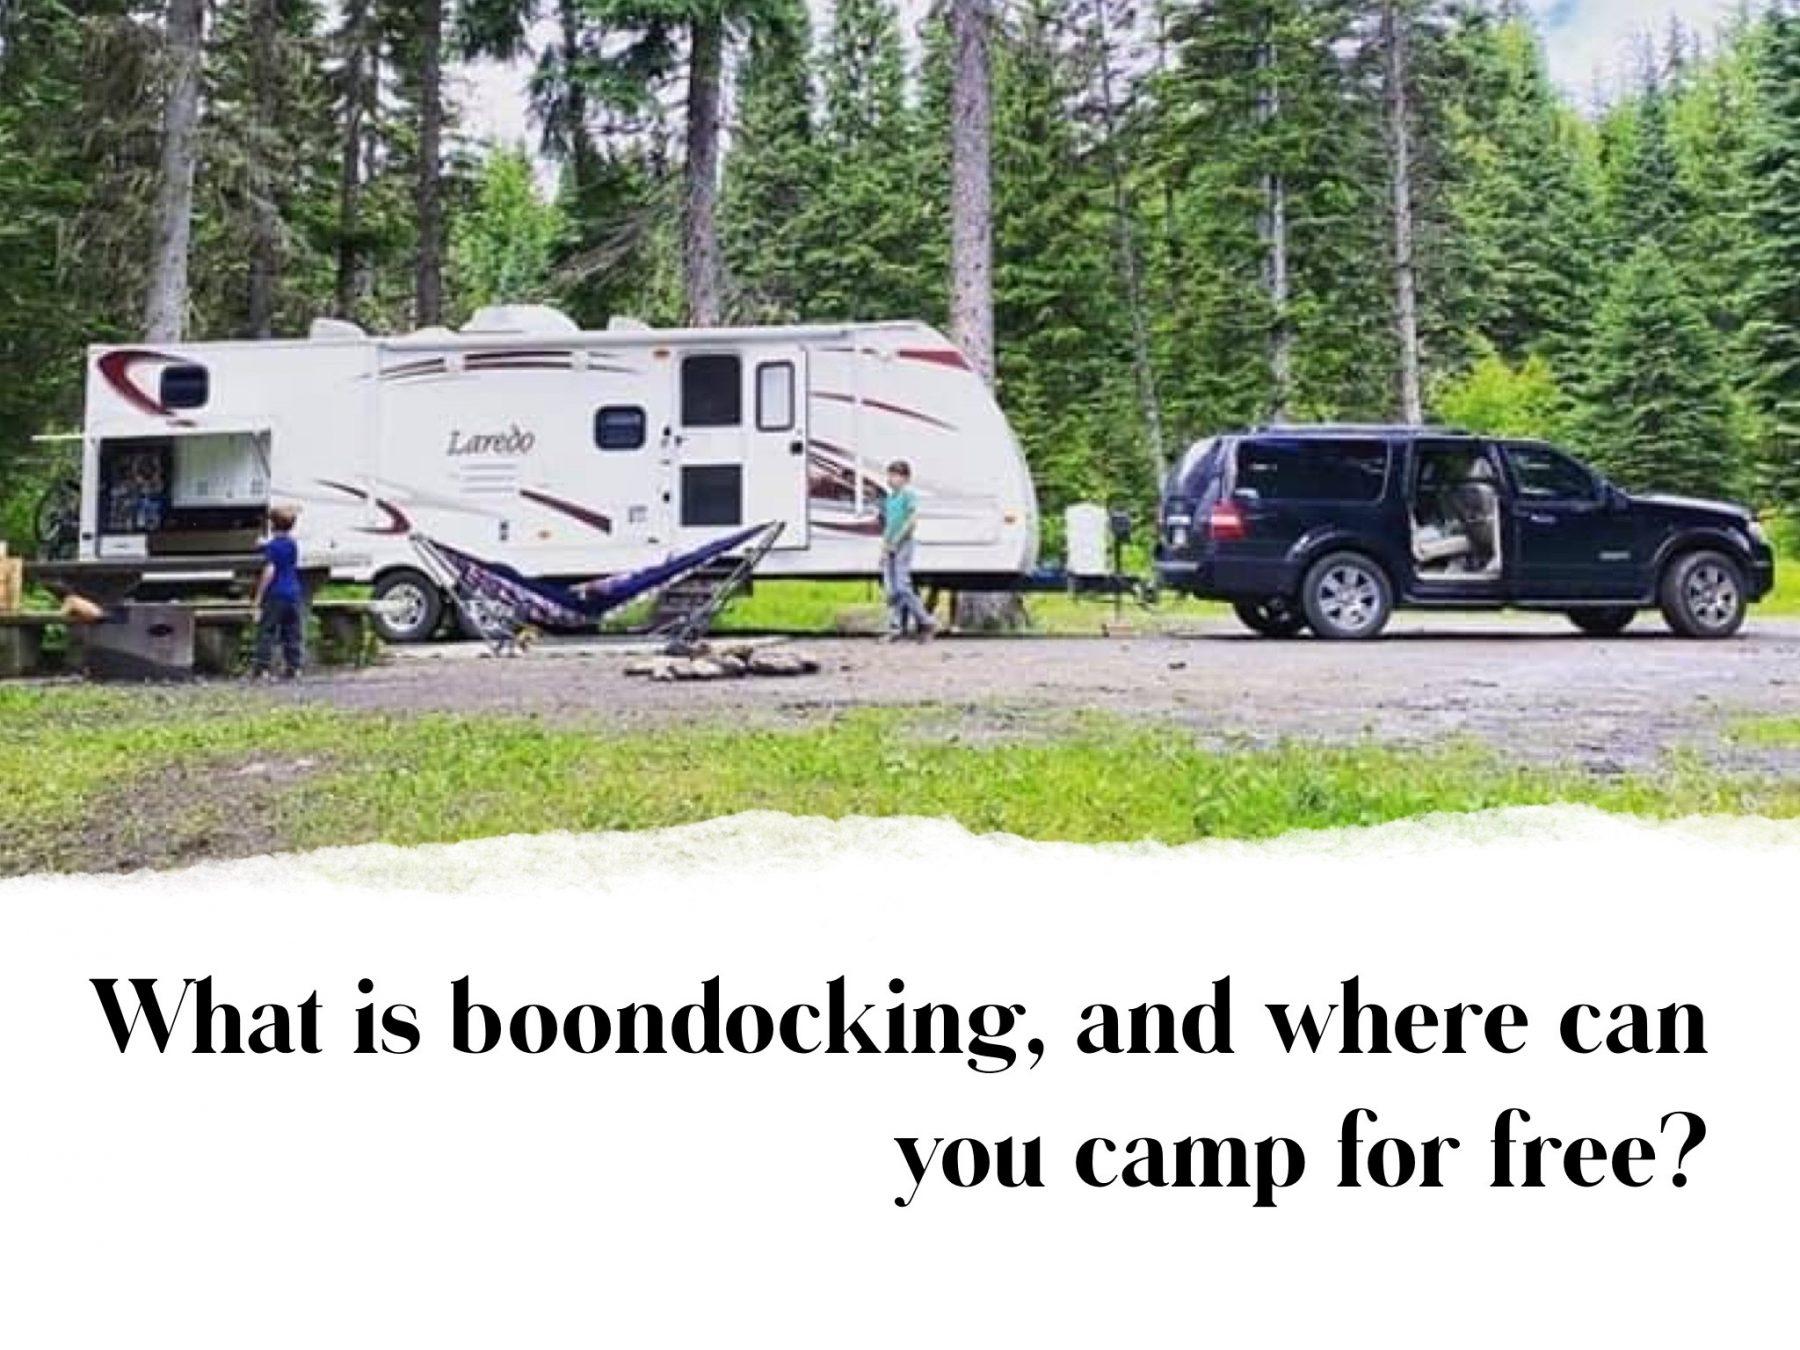 What is Boondocking (or dry camping) and where are Boondockers Welcome?